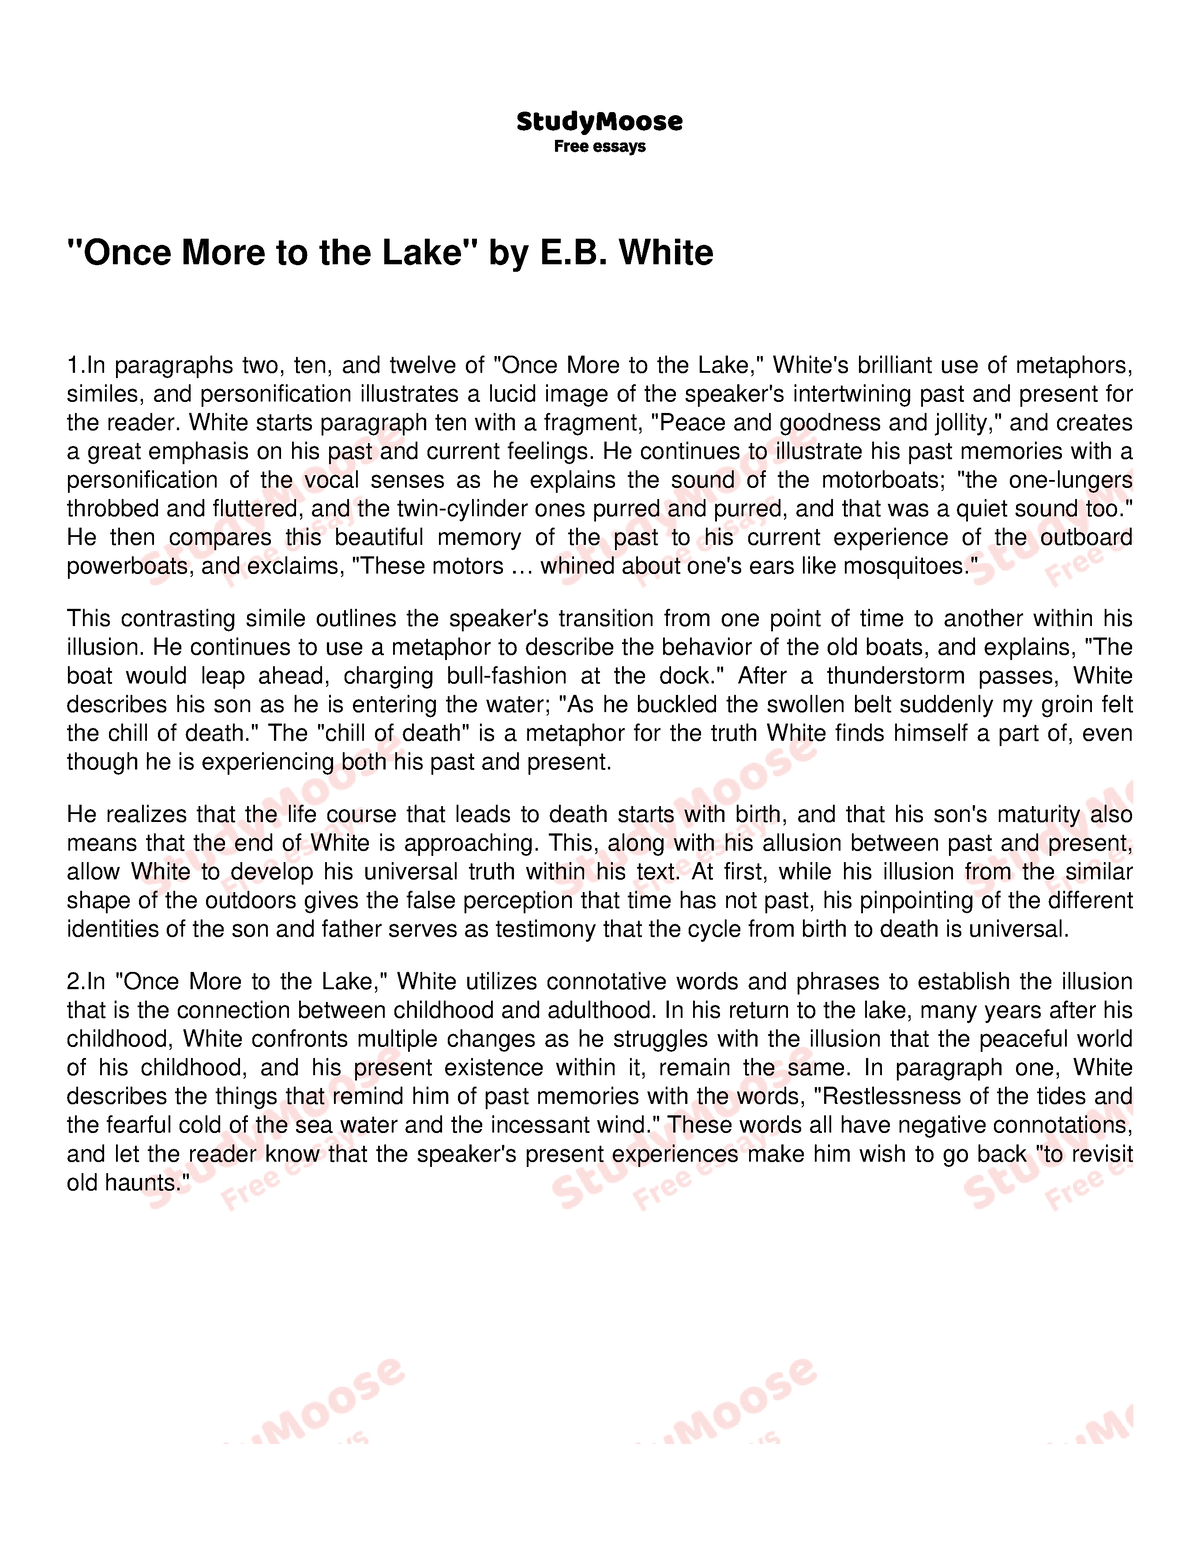 e.b. white's essay once more to the lake